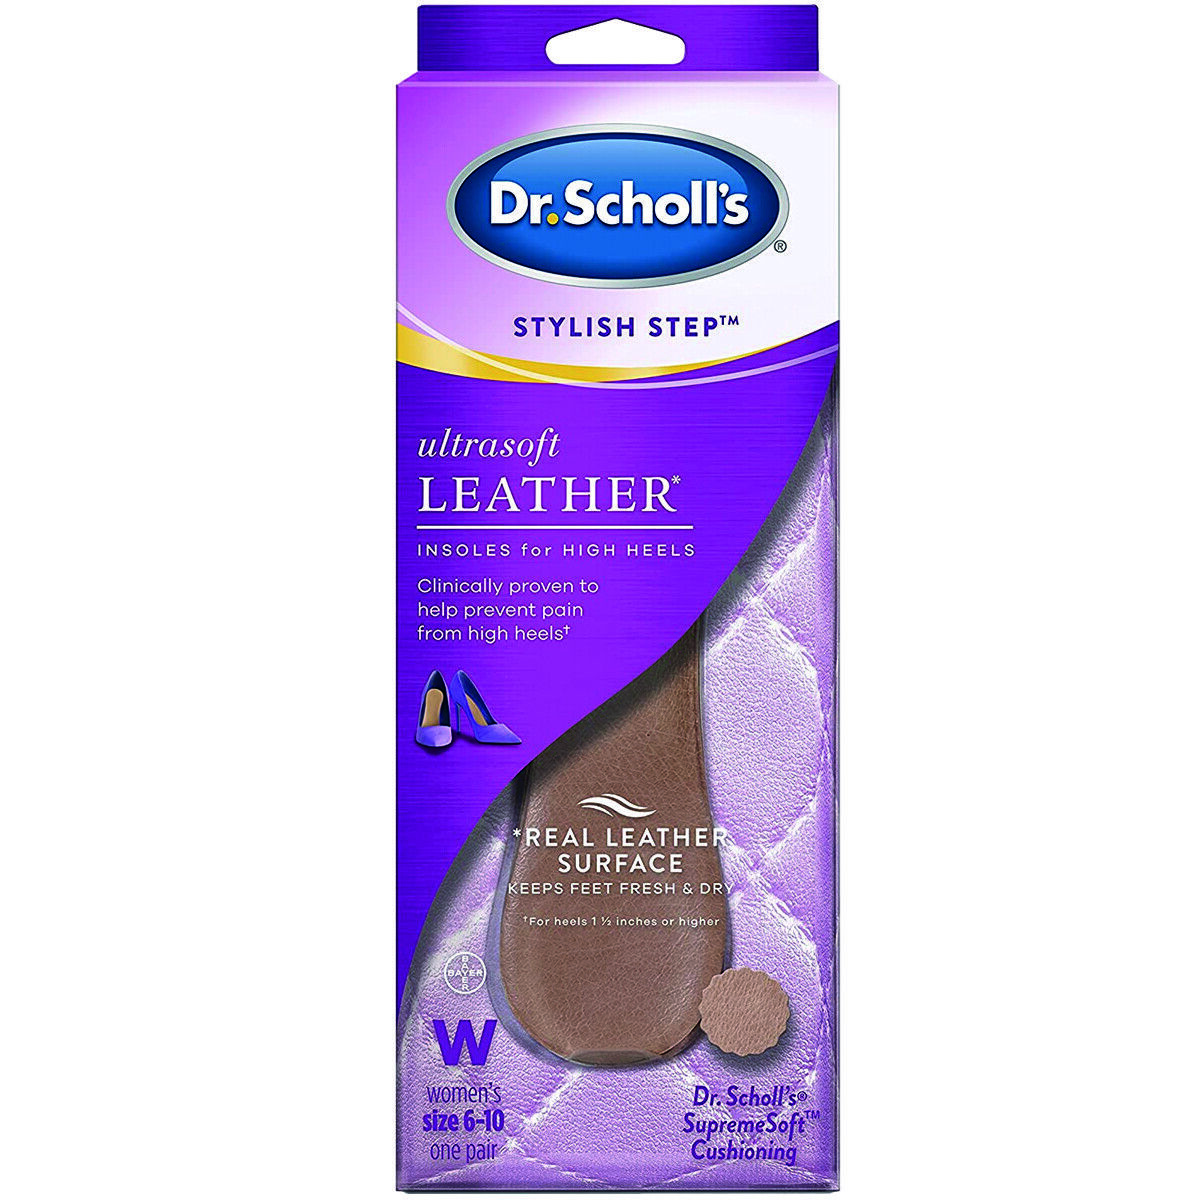 Dr. Scholl's Women’s Stylish Step Leather Insoles For High Heels, Shoe Inserts